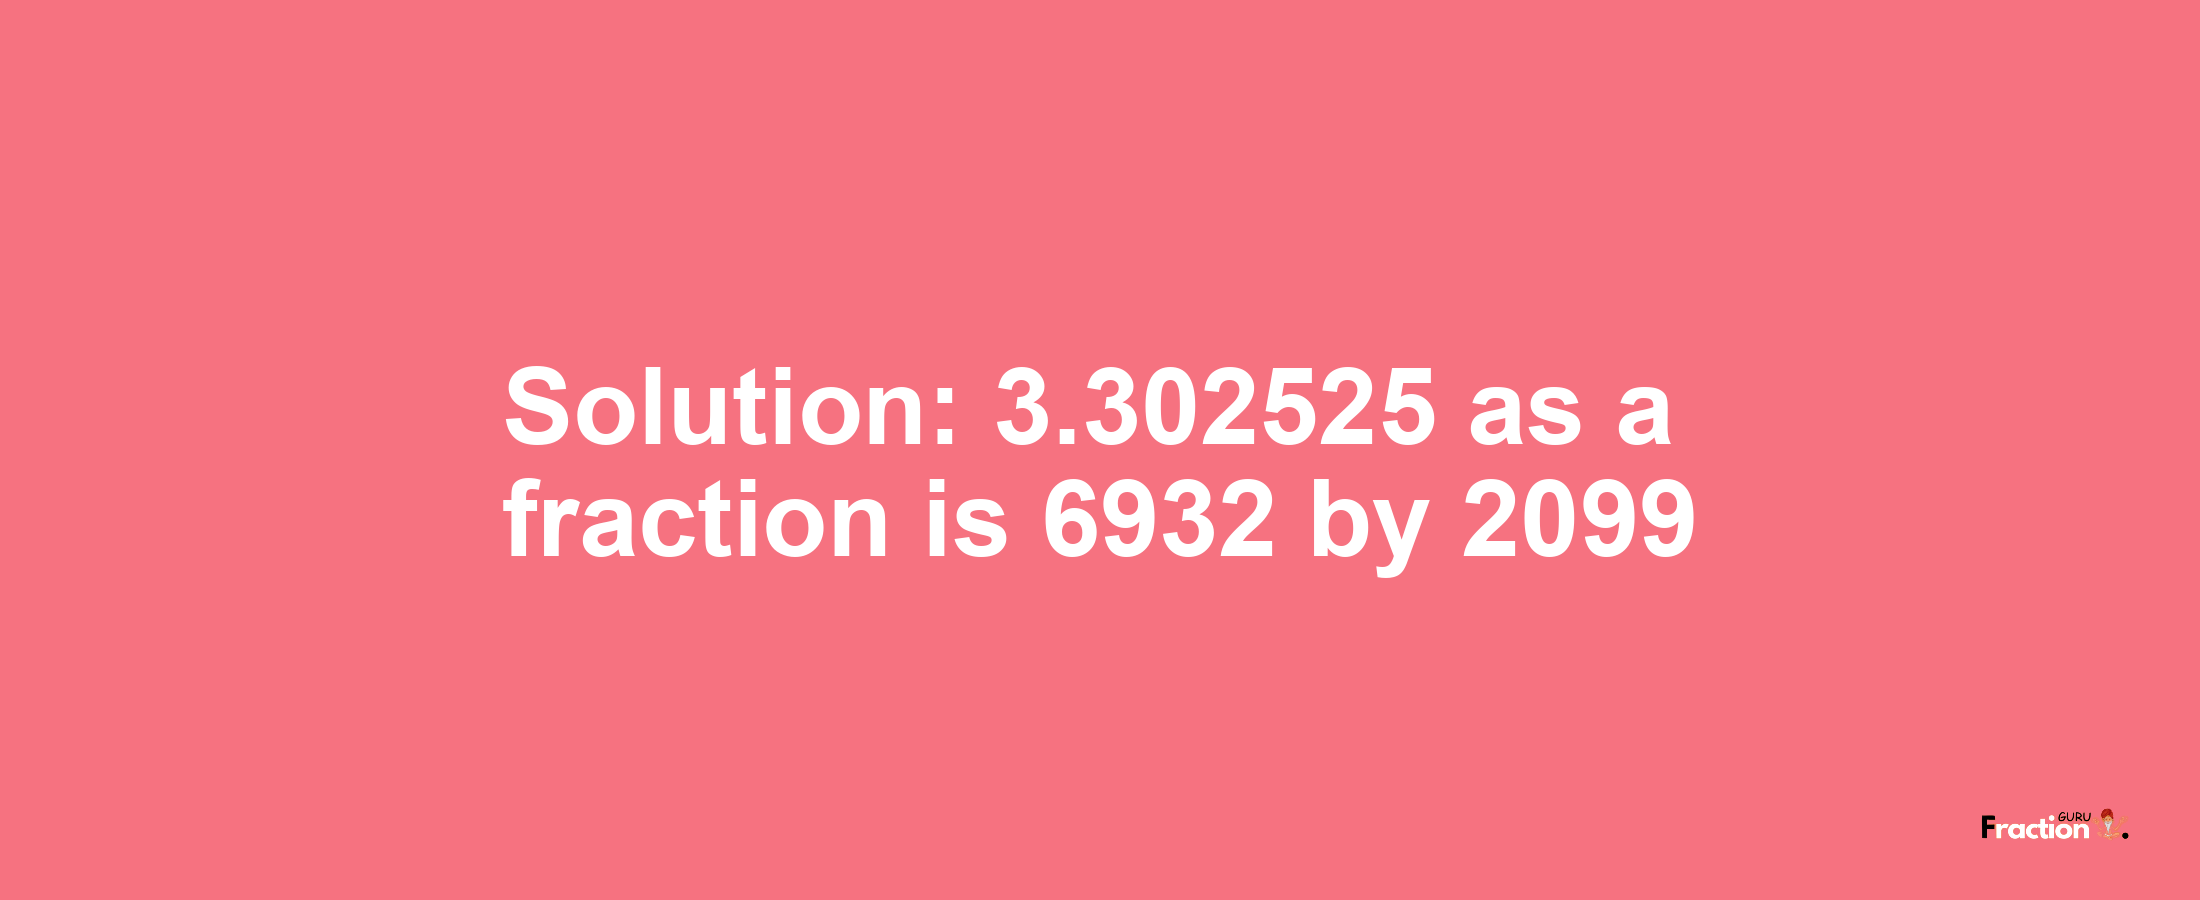 Solution:3.302525 as a fraction is 6932/2099